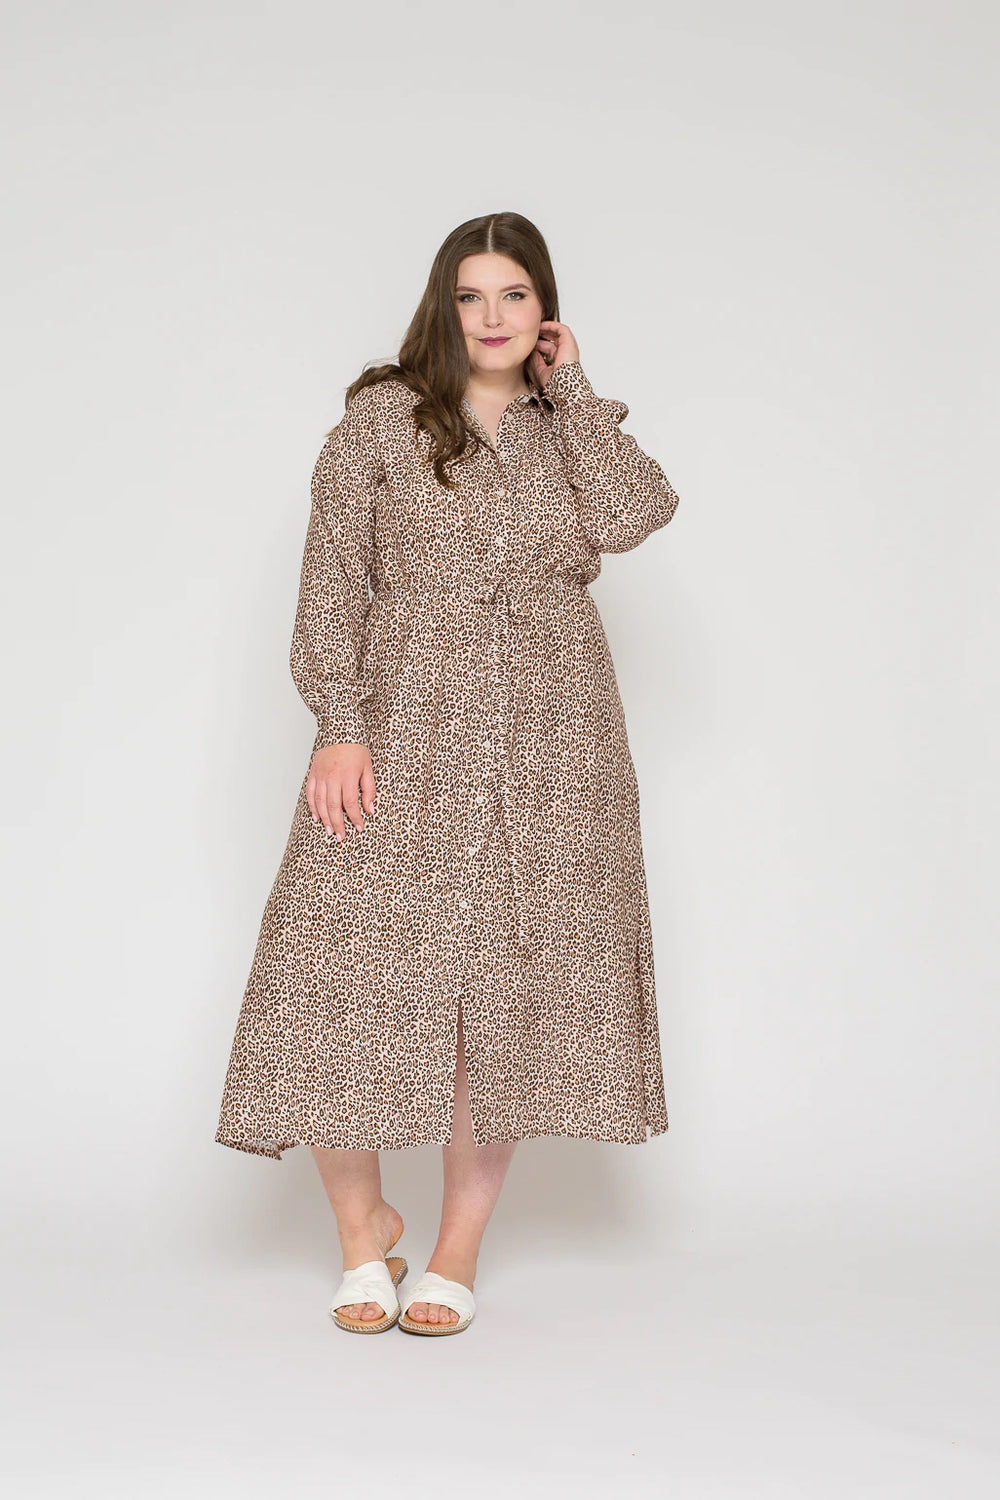 Woman wearing the Lou Shirt Dress sewing pattern from Bara Studio on The Fold Line. A shirt dress pattern made in viscose, cotton, linen or tencel fabrics, featuring a classic shirt collar, button placket, drawstring waist, extra-long sleeves with elastic